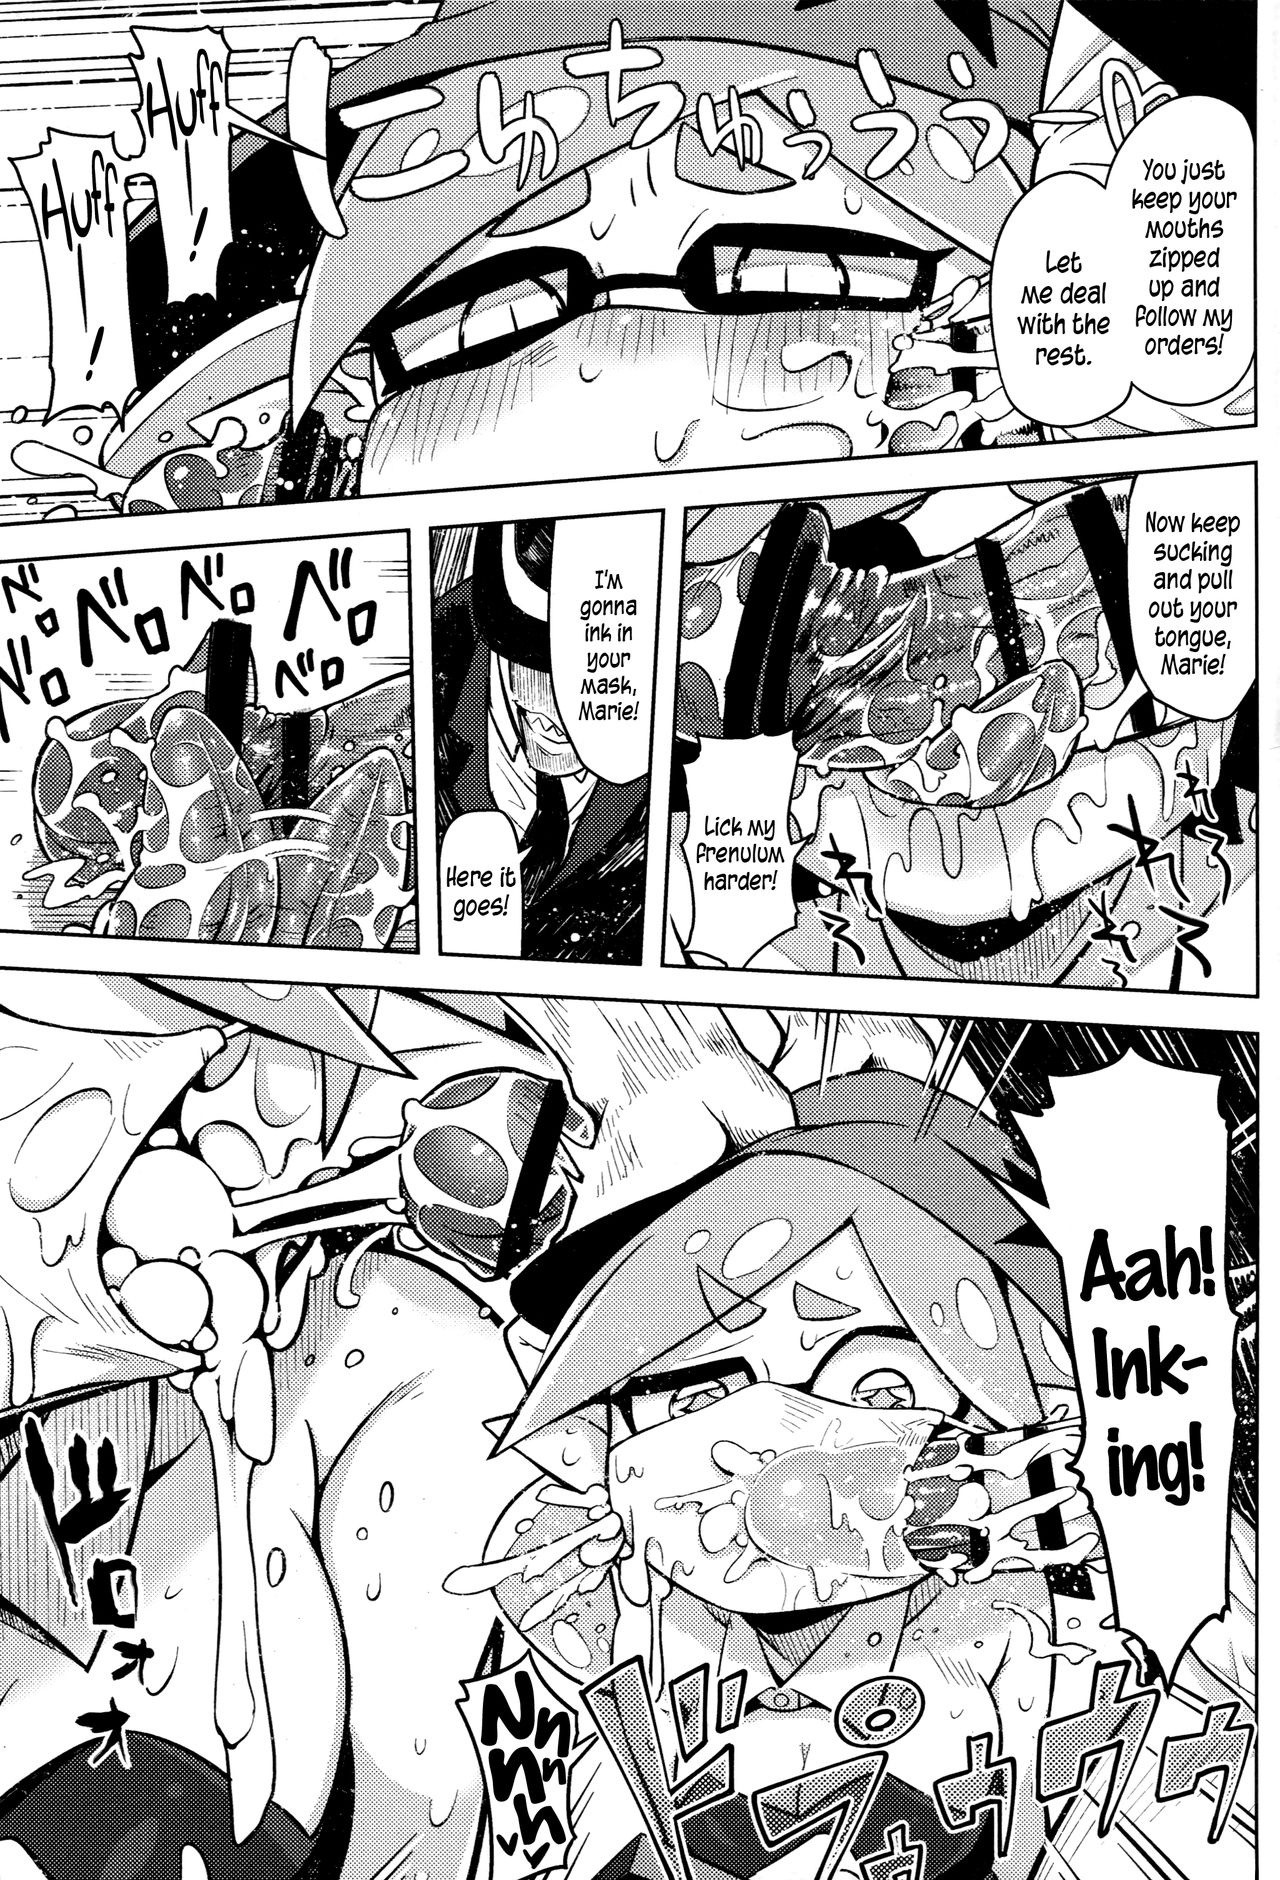 Hero by a Hair's Breadth hentai manga picture 5